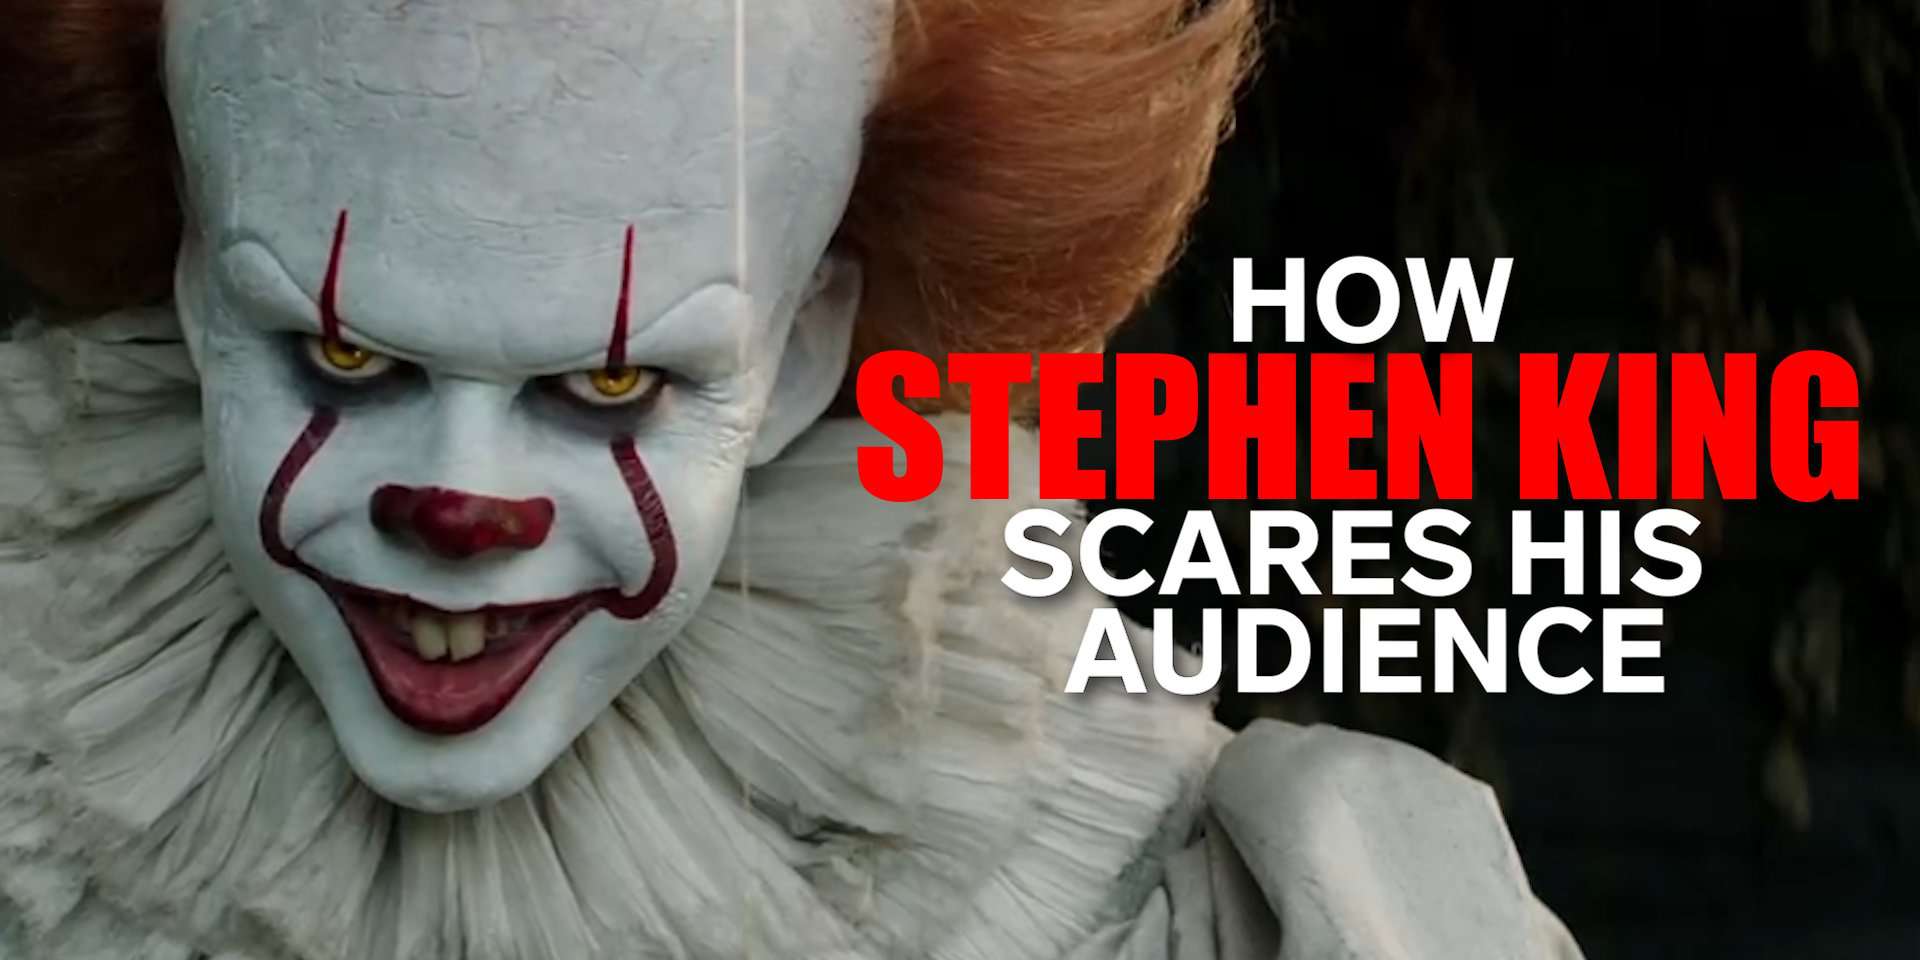 Taboola Ad Example 39897 - How Stephen King Scares His Audience